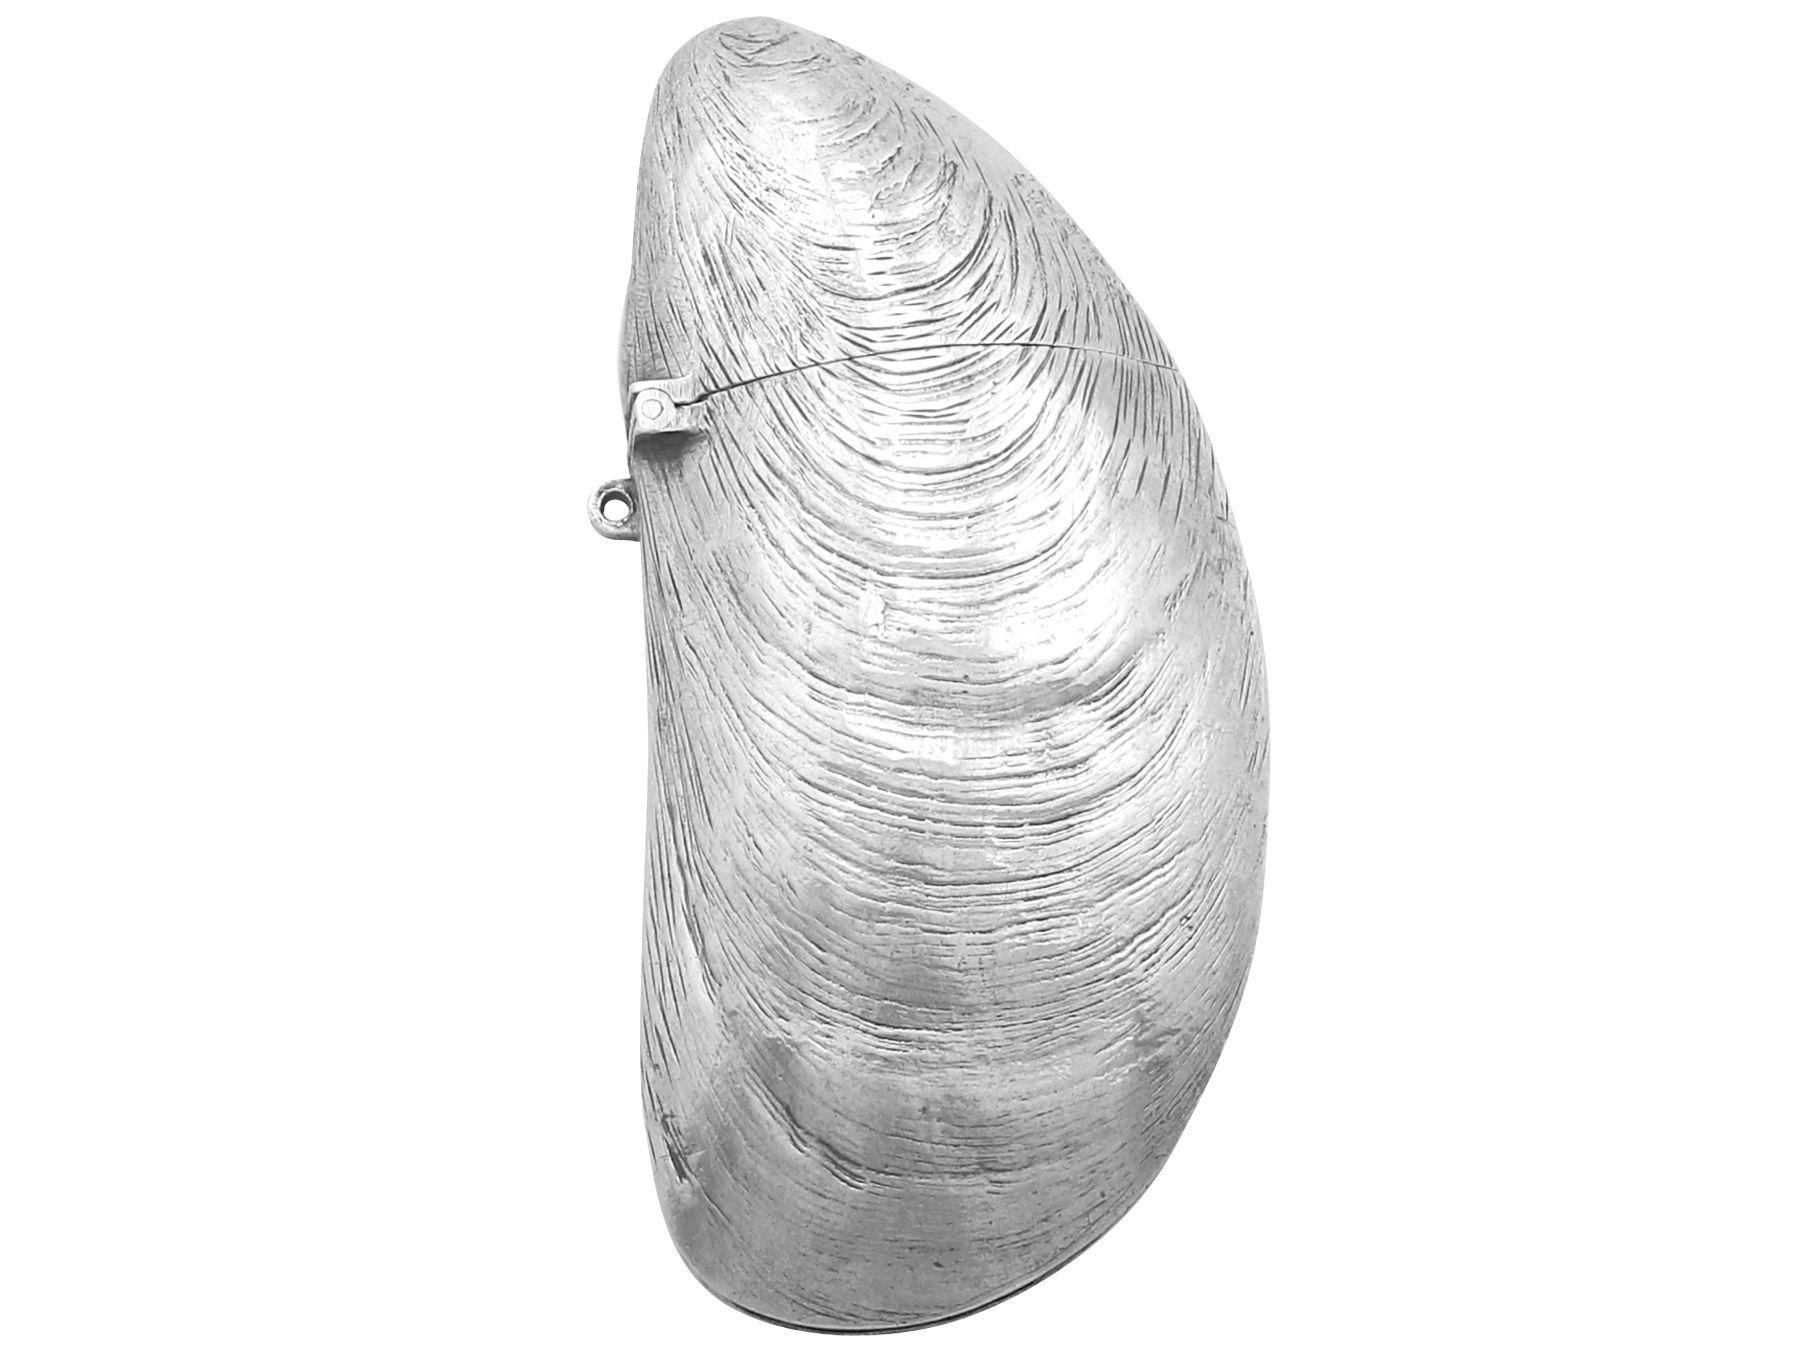 An exceptional, fine and impressive antique French silver vesta case in the form of a mussel; an addition to our diverse smoking related silverware collection

This exceptional antique French silver vesta case has an elongated asymmetrical form,